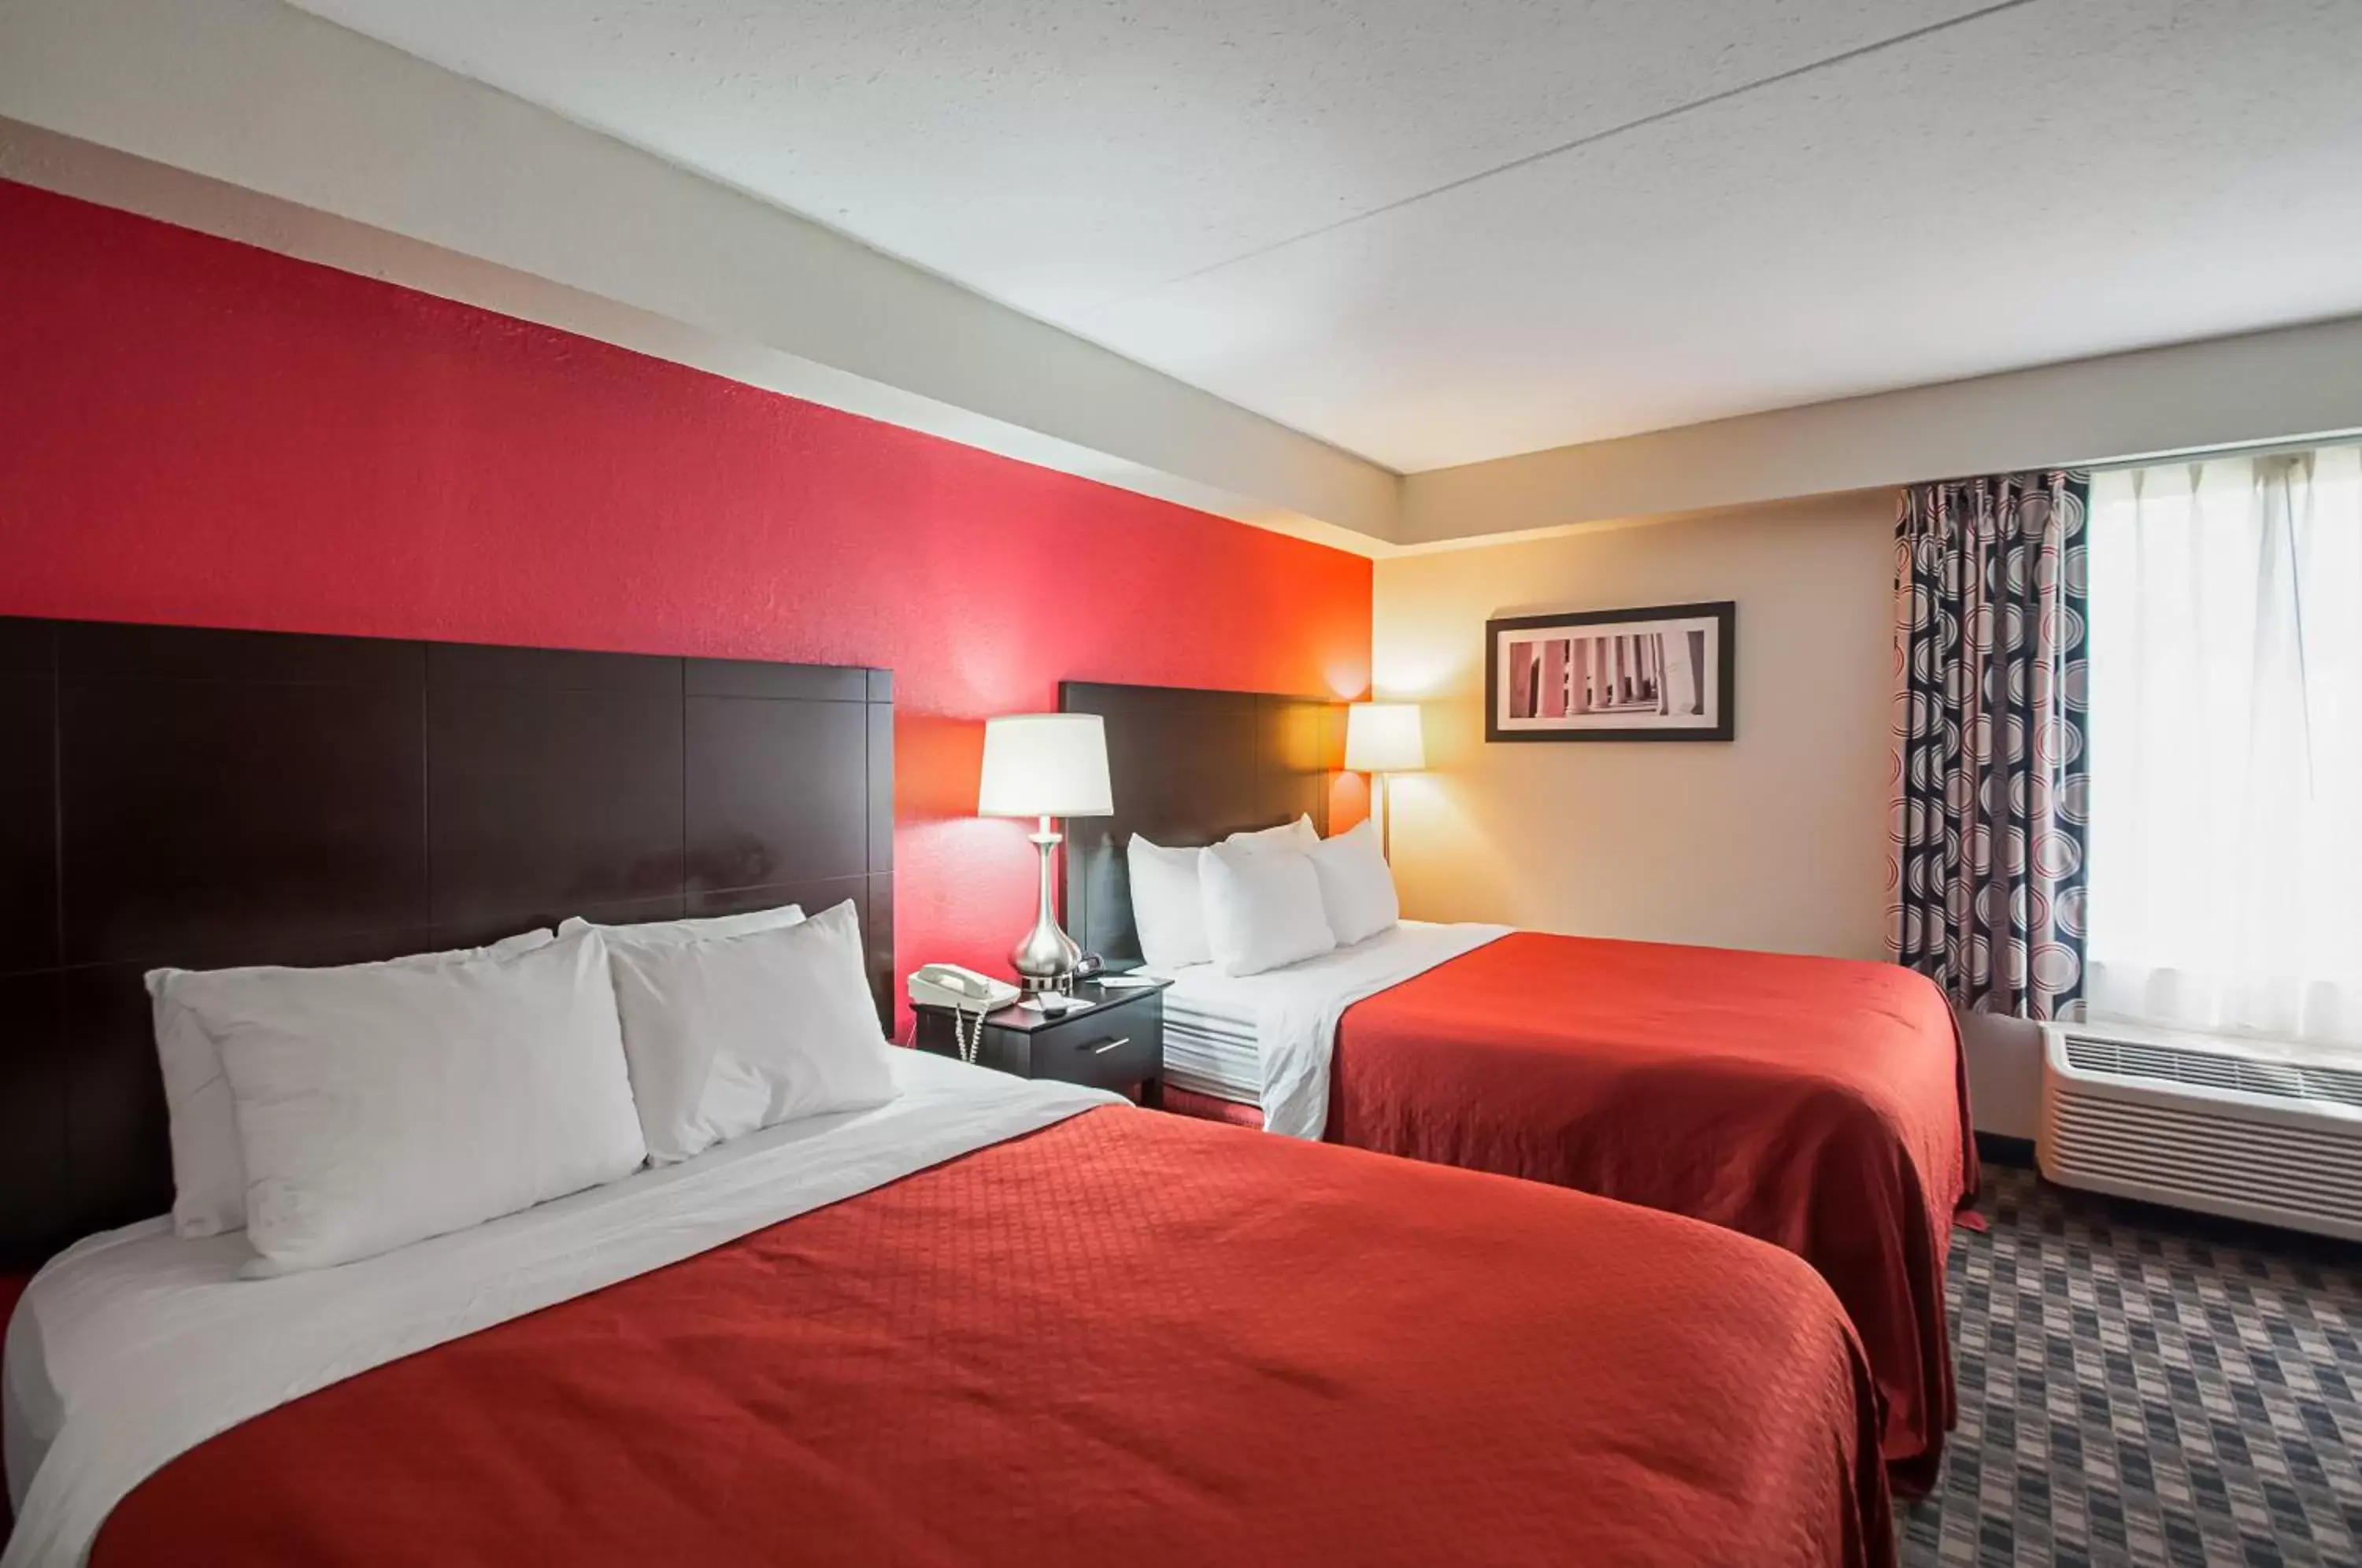 Queen Room with Two Queen Beds - Non-Smoking/Pet Friendly in Quality Inn near Potomac Mills